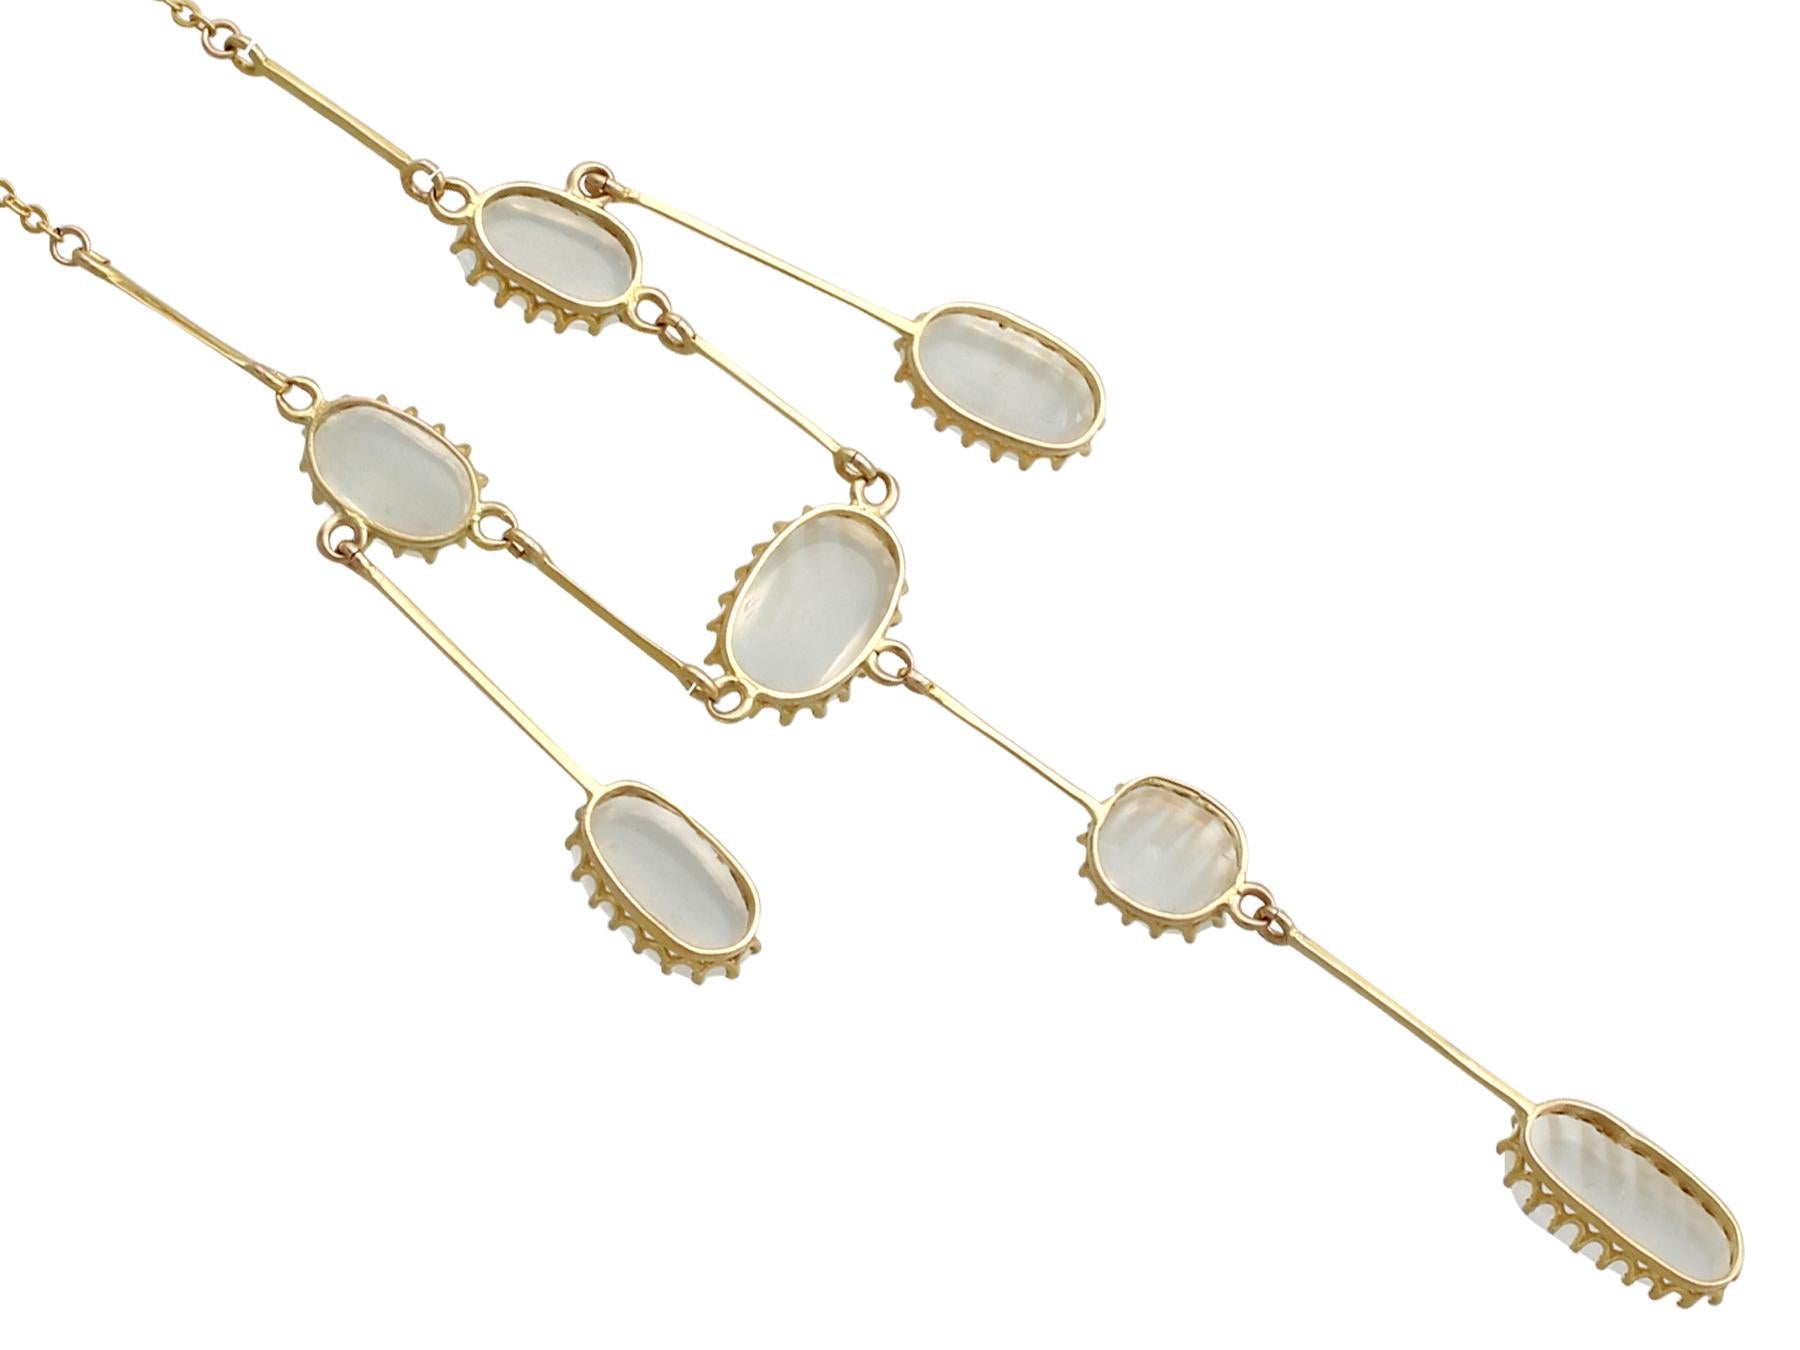 Antique 10.35 Carat Cabochon Cut Moonstone and Yellow Gold Pendant Drop Necklace For Sale 1